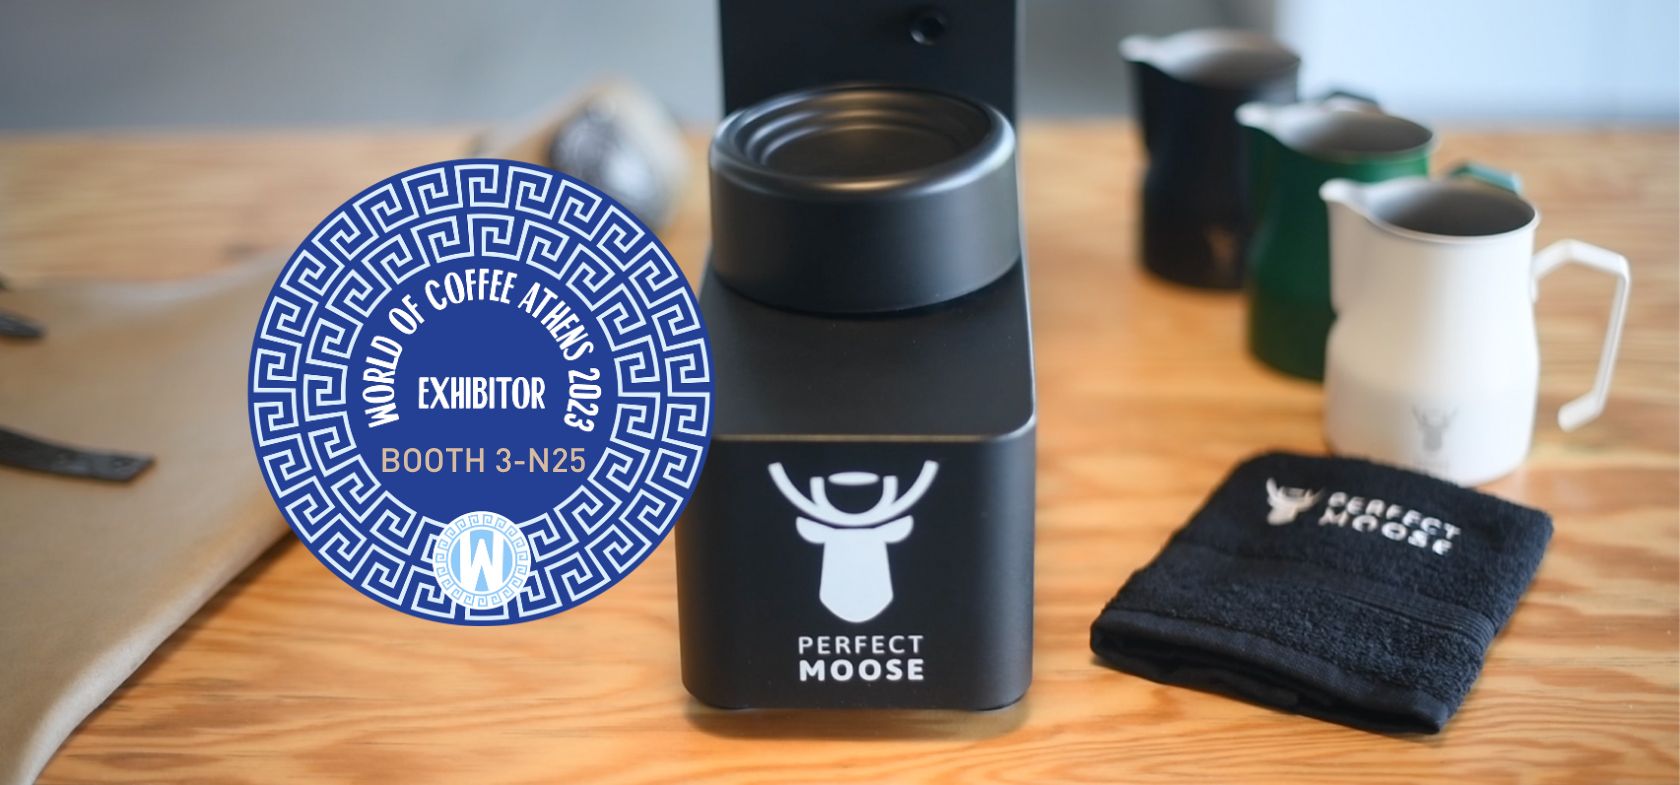 Moose Jack nominated for Best New Product at World of Coffee Athens